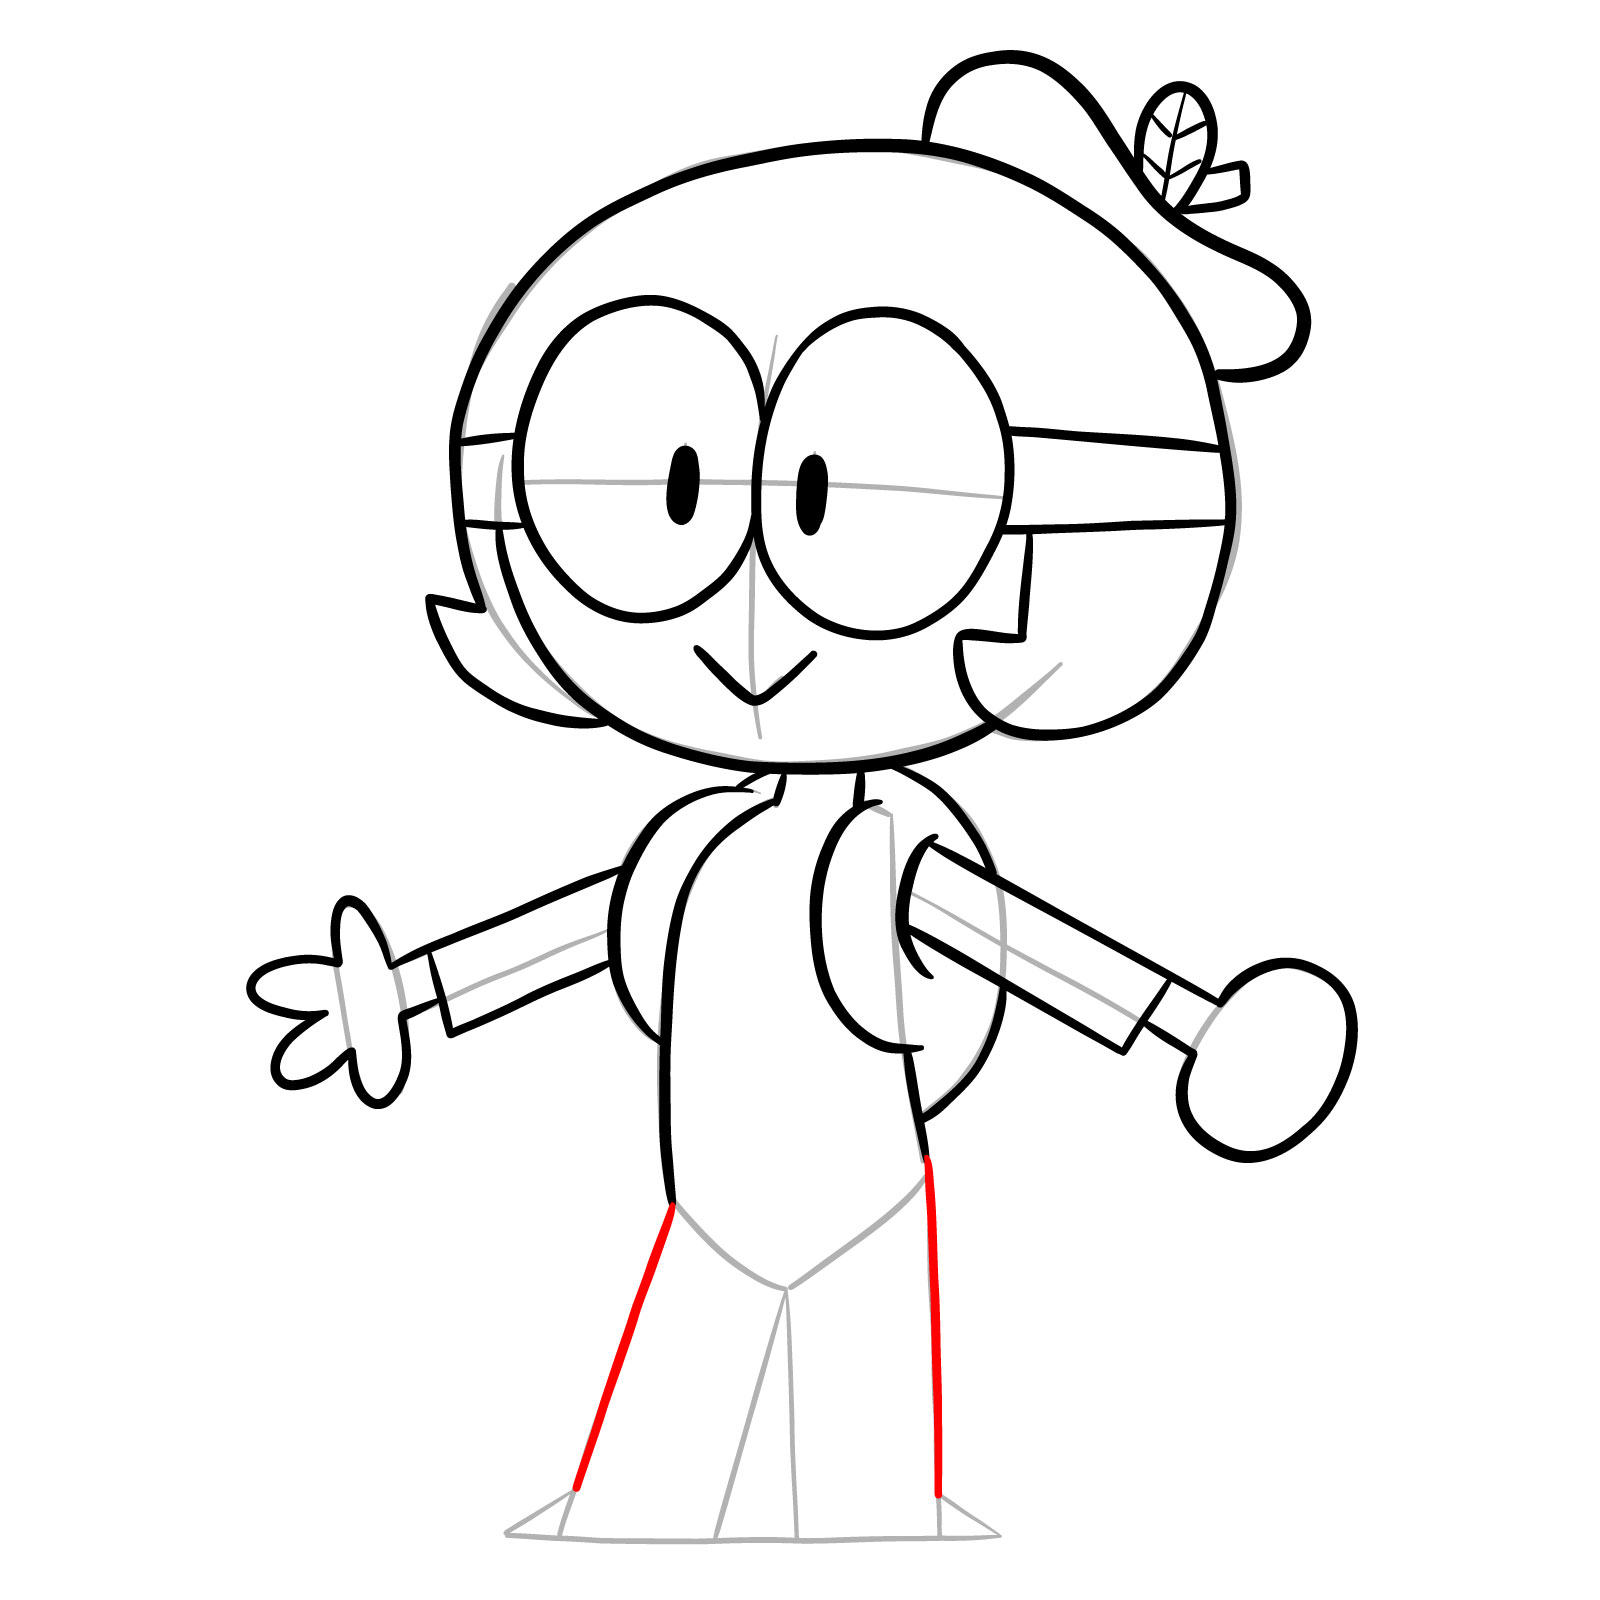 How to draw Dendy from OK K.O.! - step 18